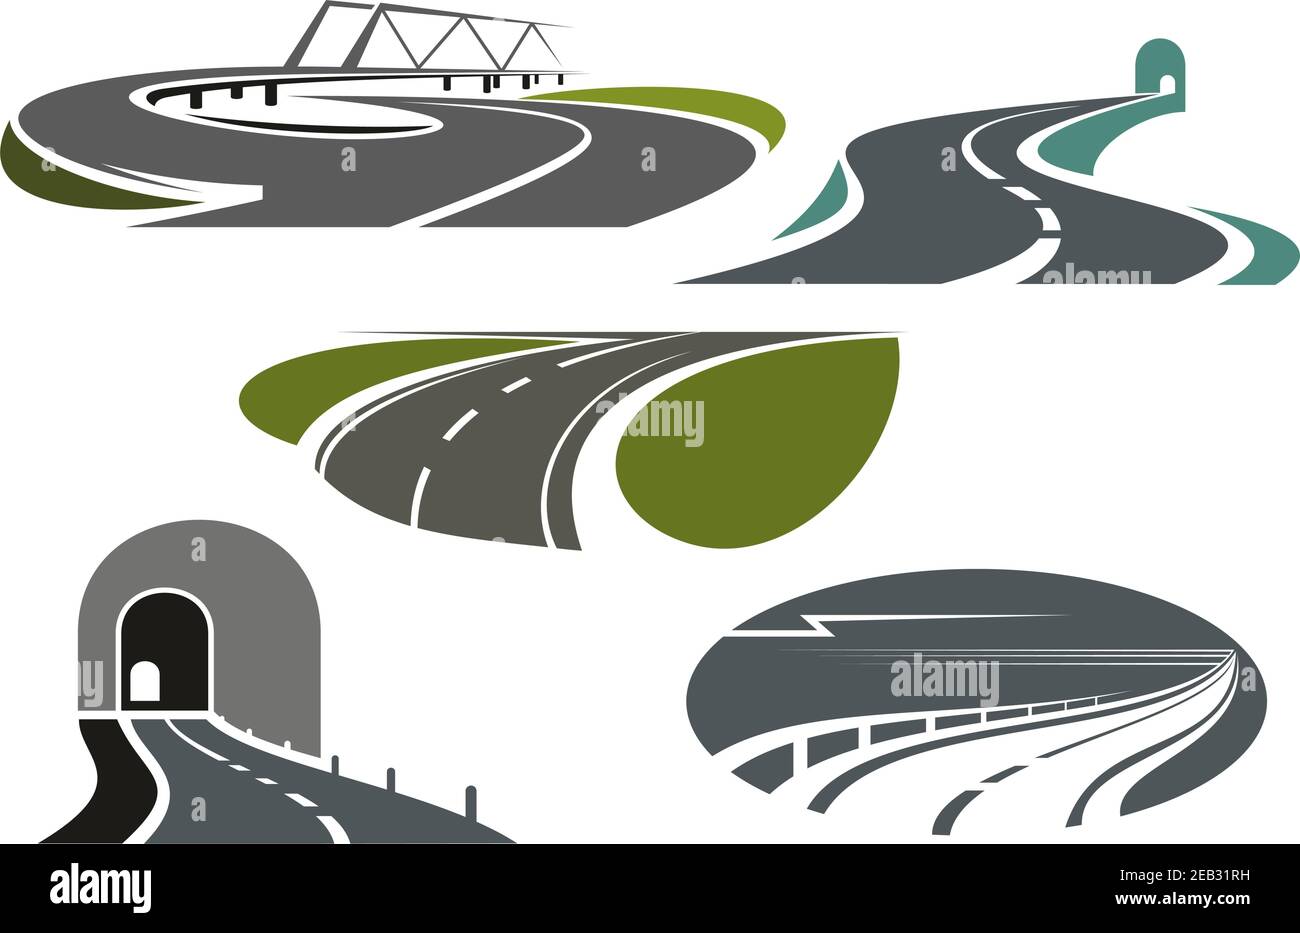 Mountain tunnels, highways, overpass road with bridge and winding bypass rural roads. Icons for travel or transportation themes Stock Vector